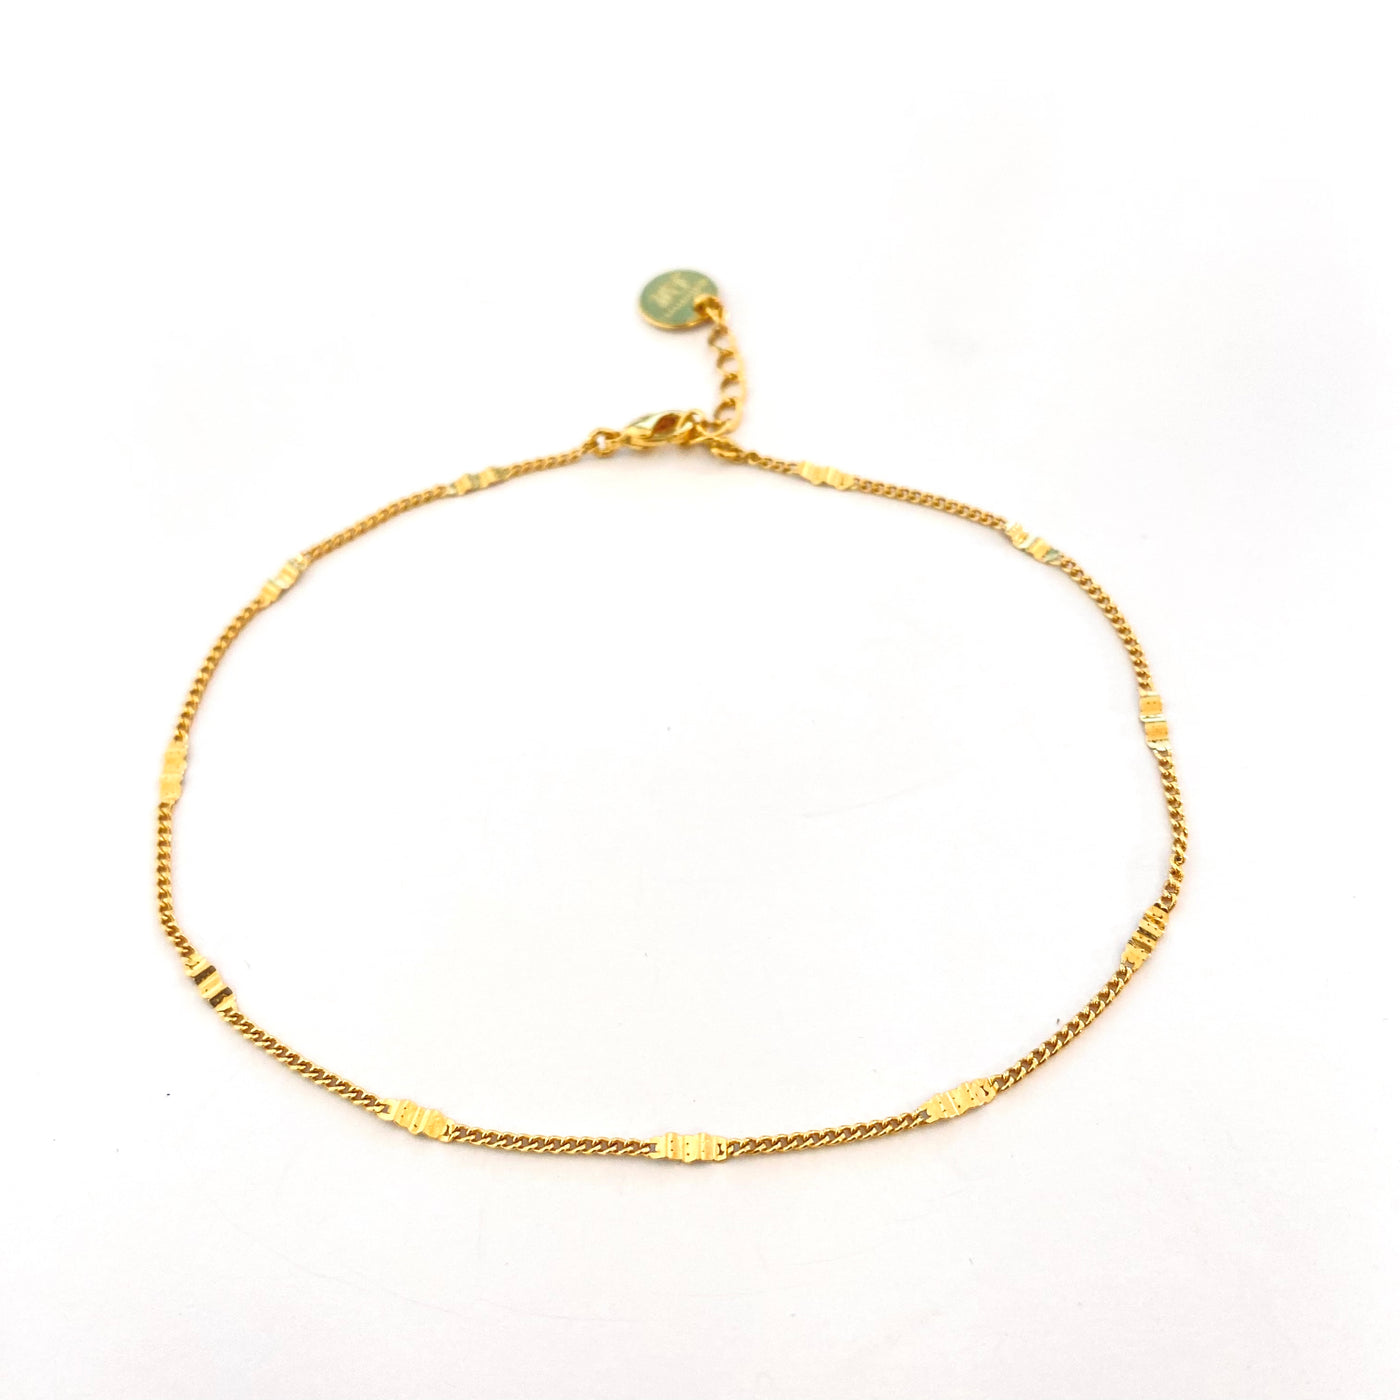 SEA - Gold plated ankle bracelet